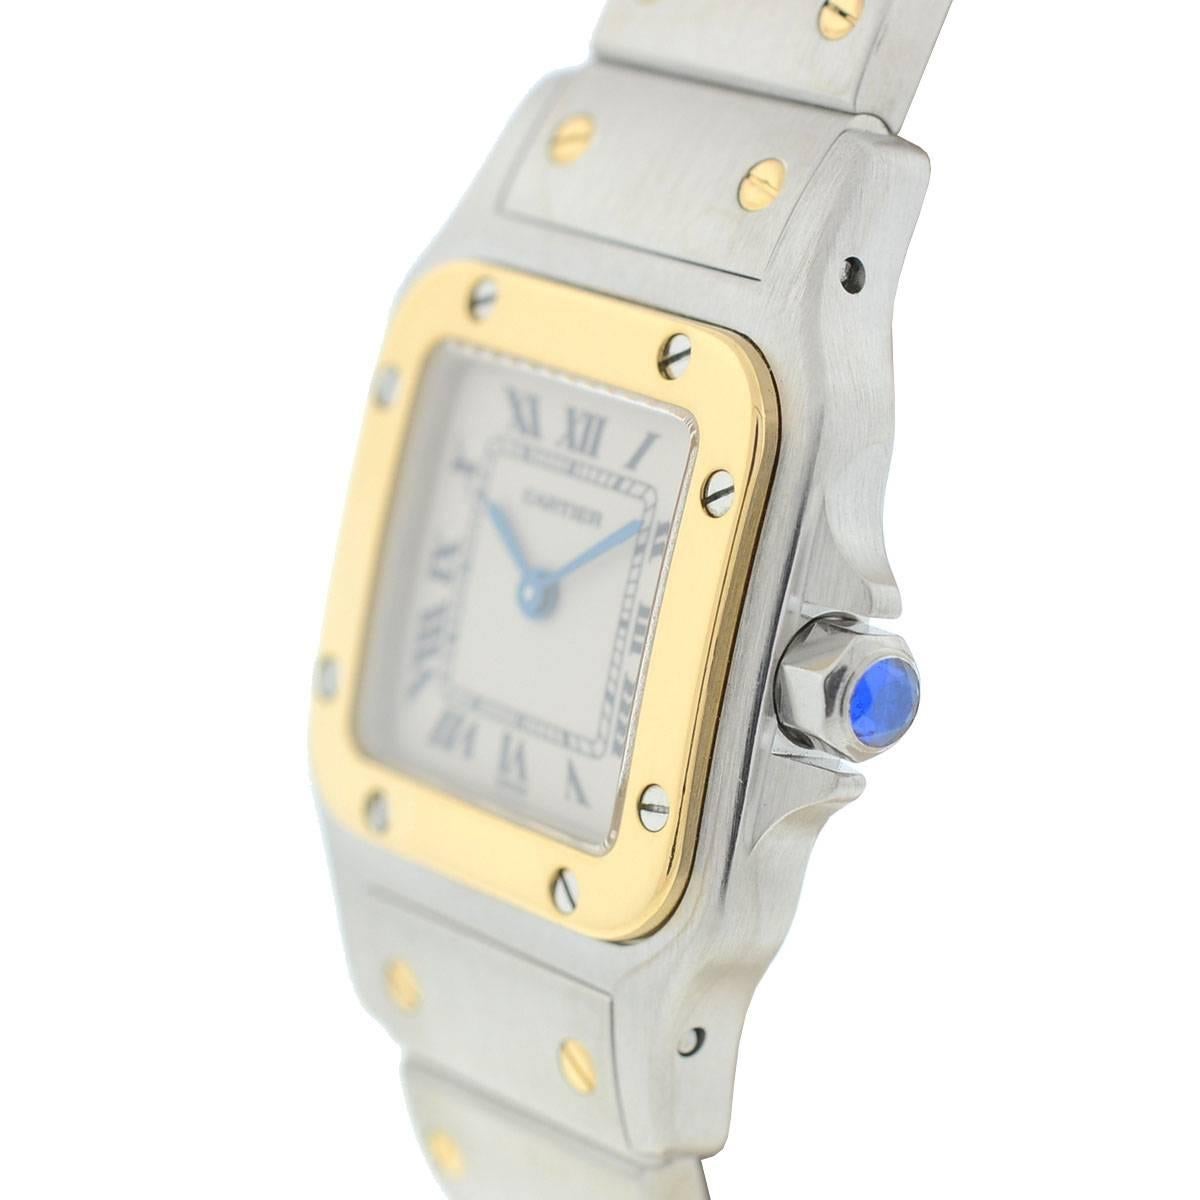 Company-Cartier
Style-Dress
Model-Santos
Reference Number-W2SA0007
Case Metal-Two Tone Steel/Gold 
Case Measurement-35.1mm
Bracelet-5.5''
Dial-Silver
Bezel-18K yellow gold
Crystal-Scratch Sapphire Crystal
Movement-Automatic
Includes-Watch only
SKU: